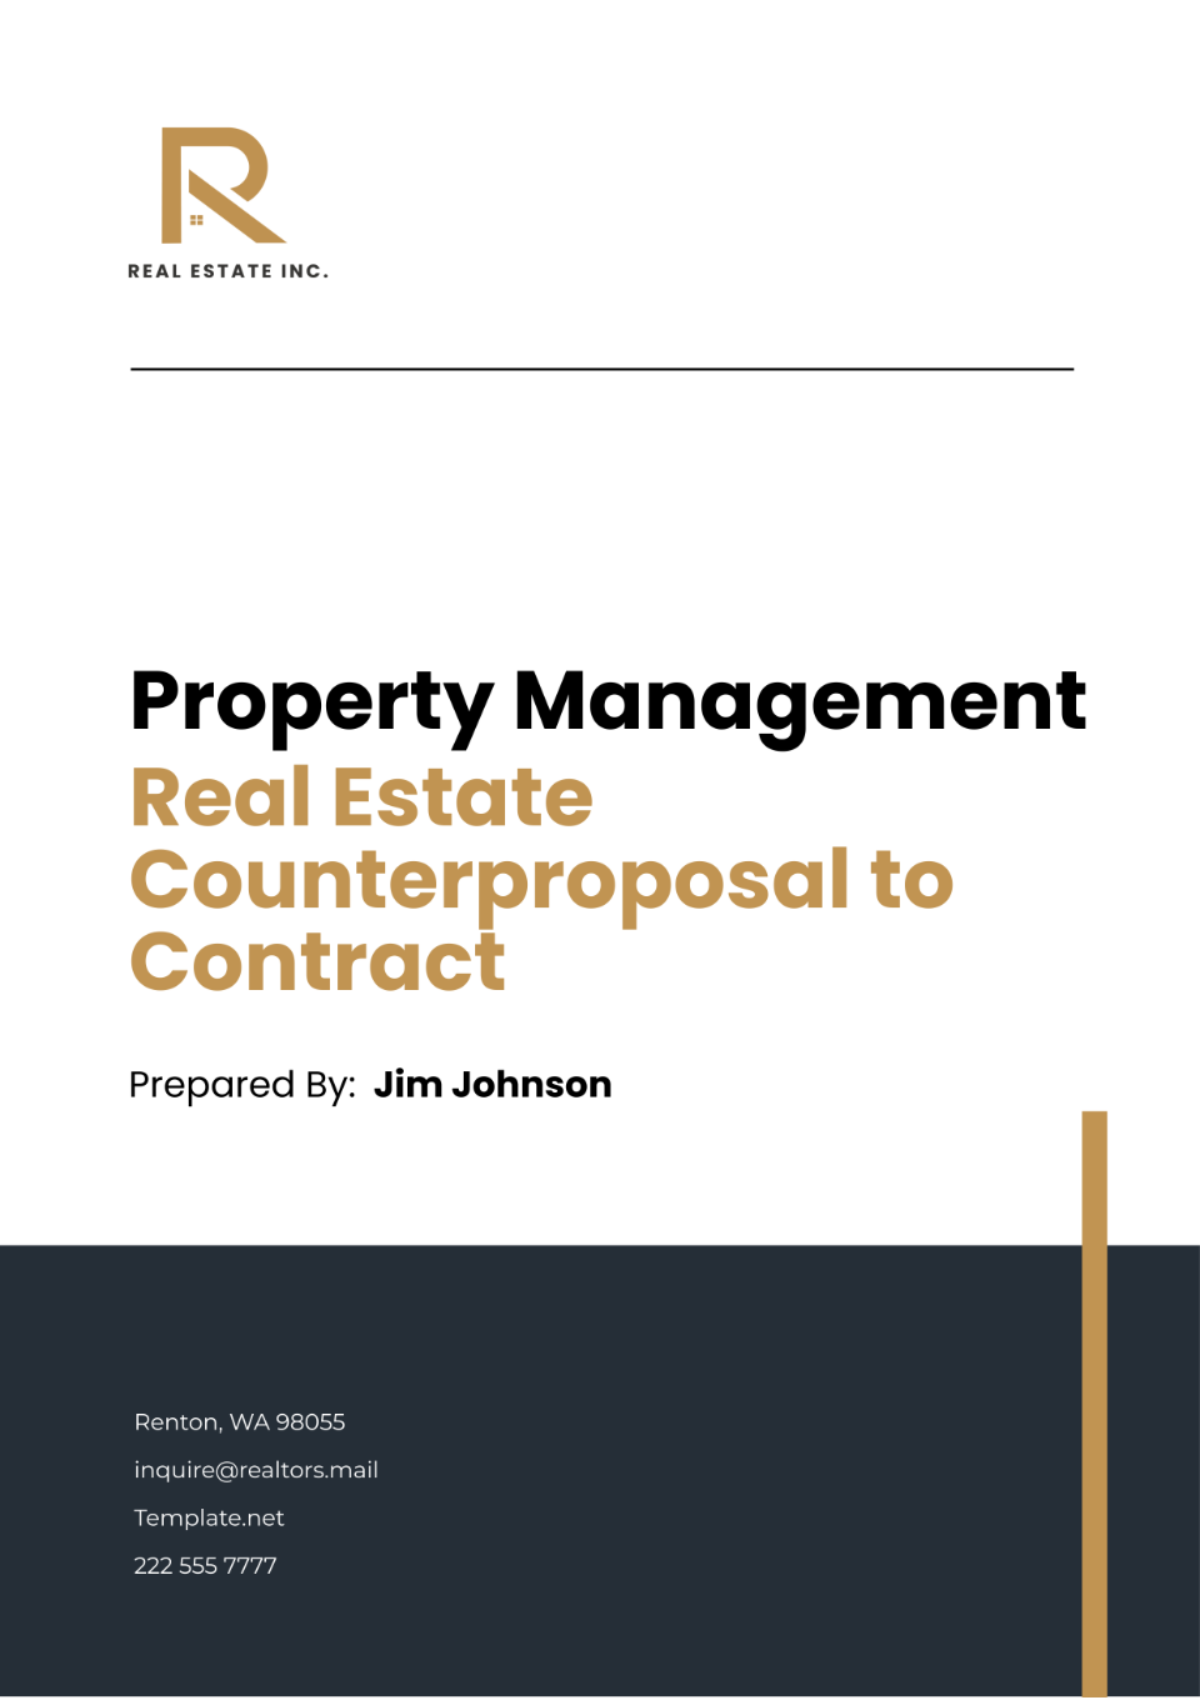 Real Estate Counterproposal to Contract Template